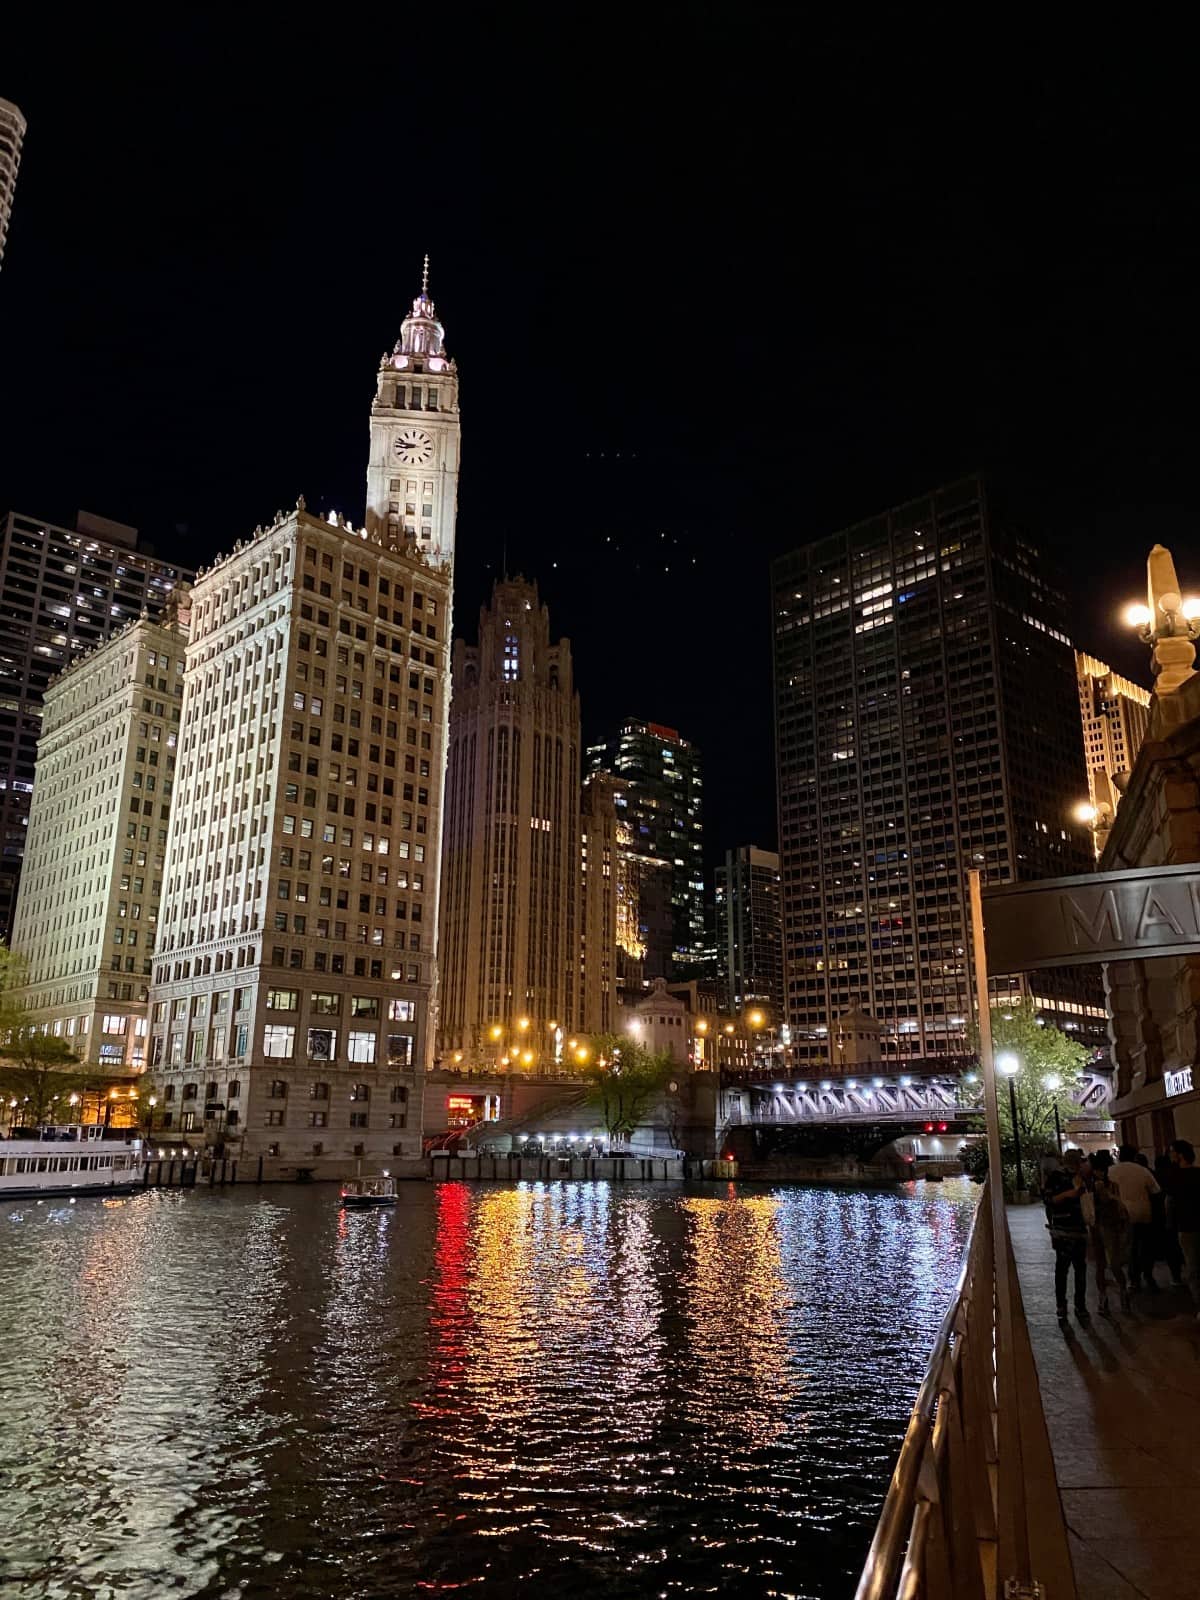 Chicago photography tips, urban photography tips - nighttime lights (especially on the water)